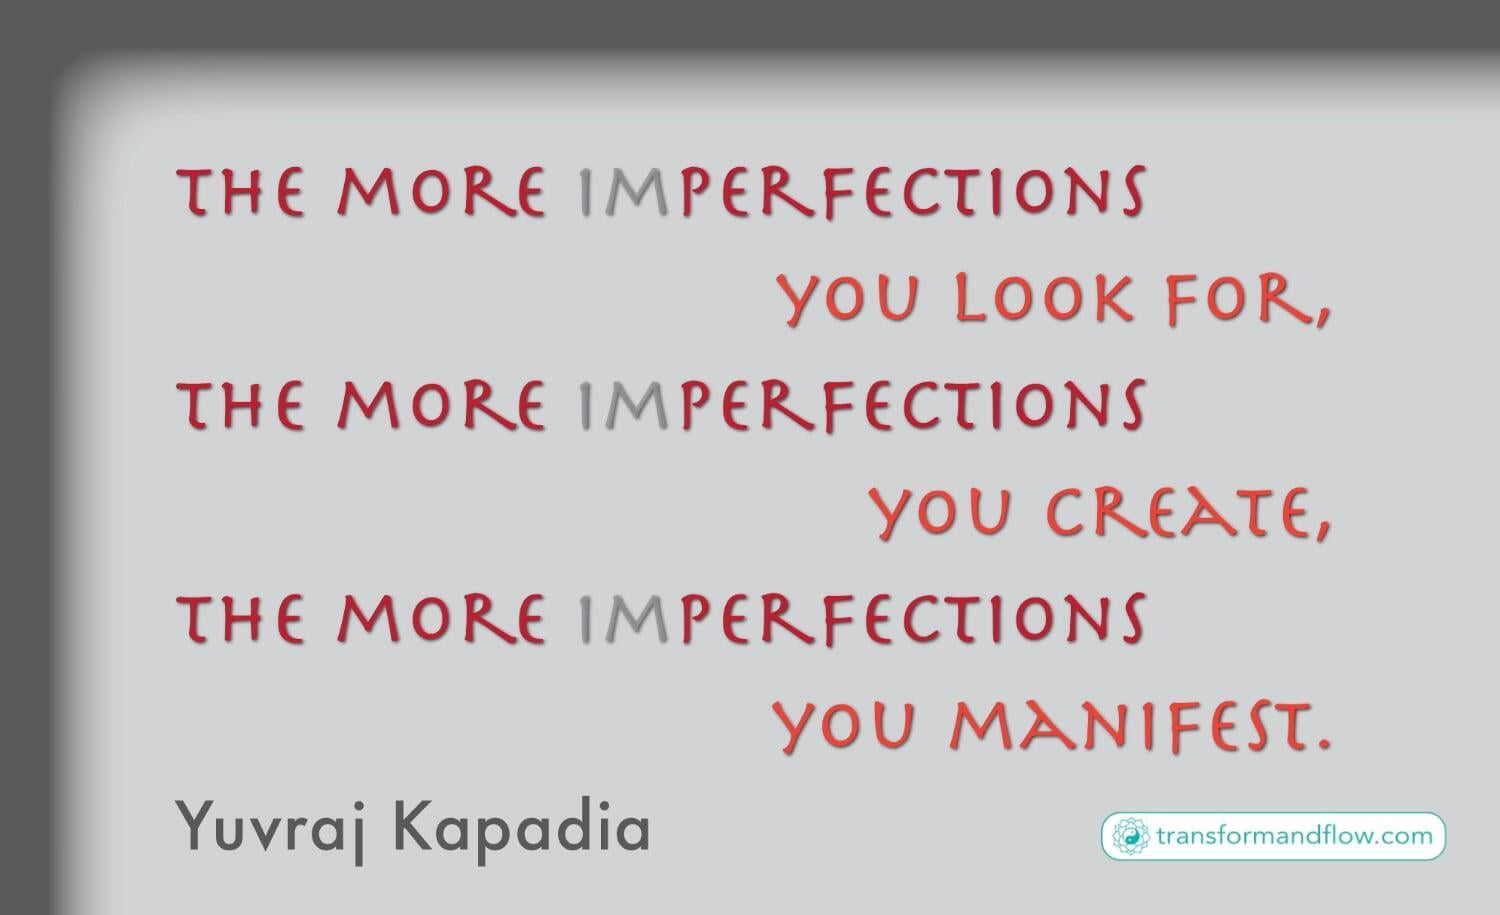 Are You Manifesting Perfection or Im-perfection?